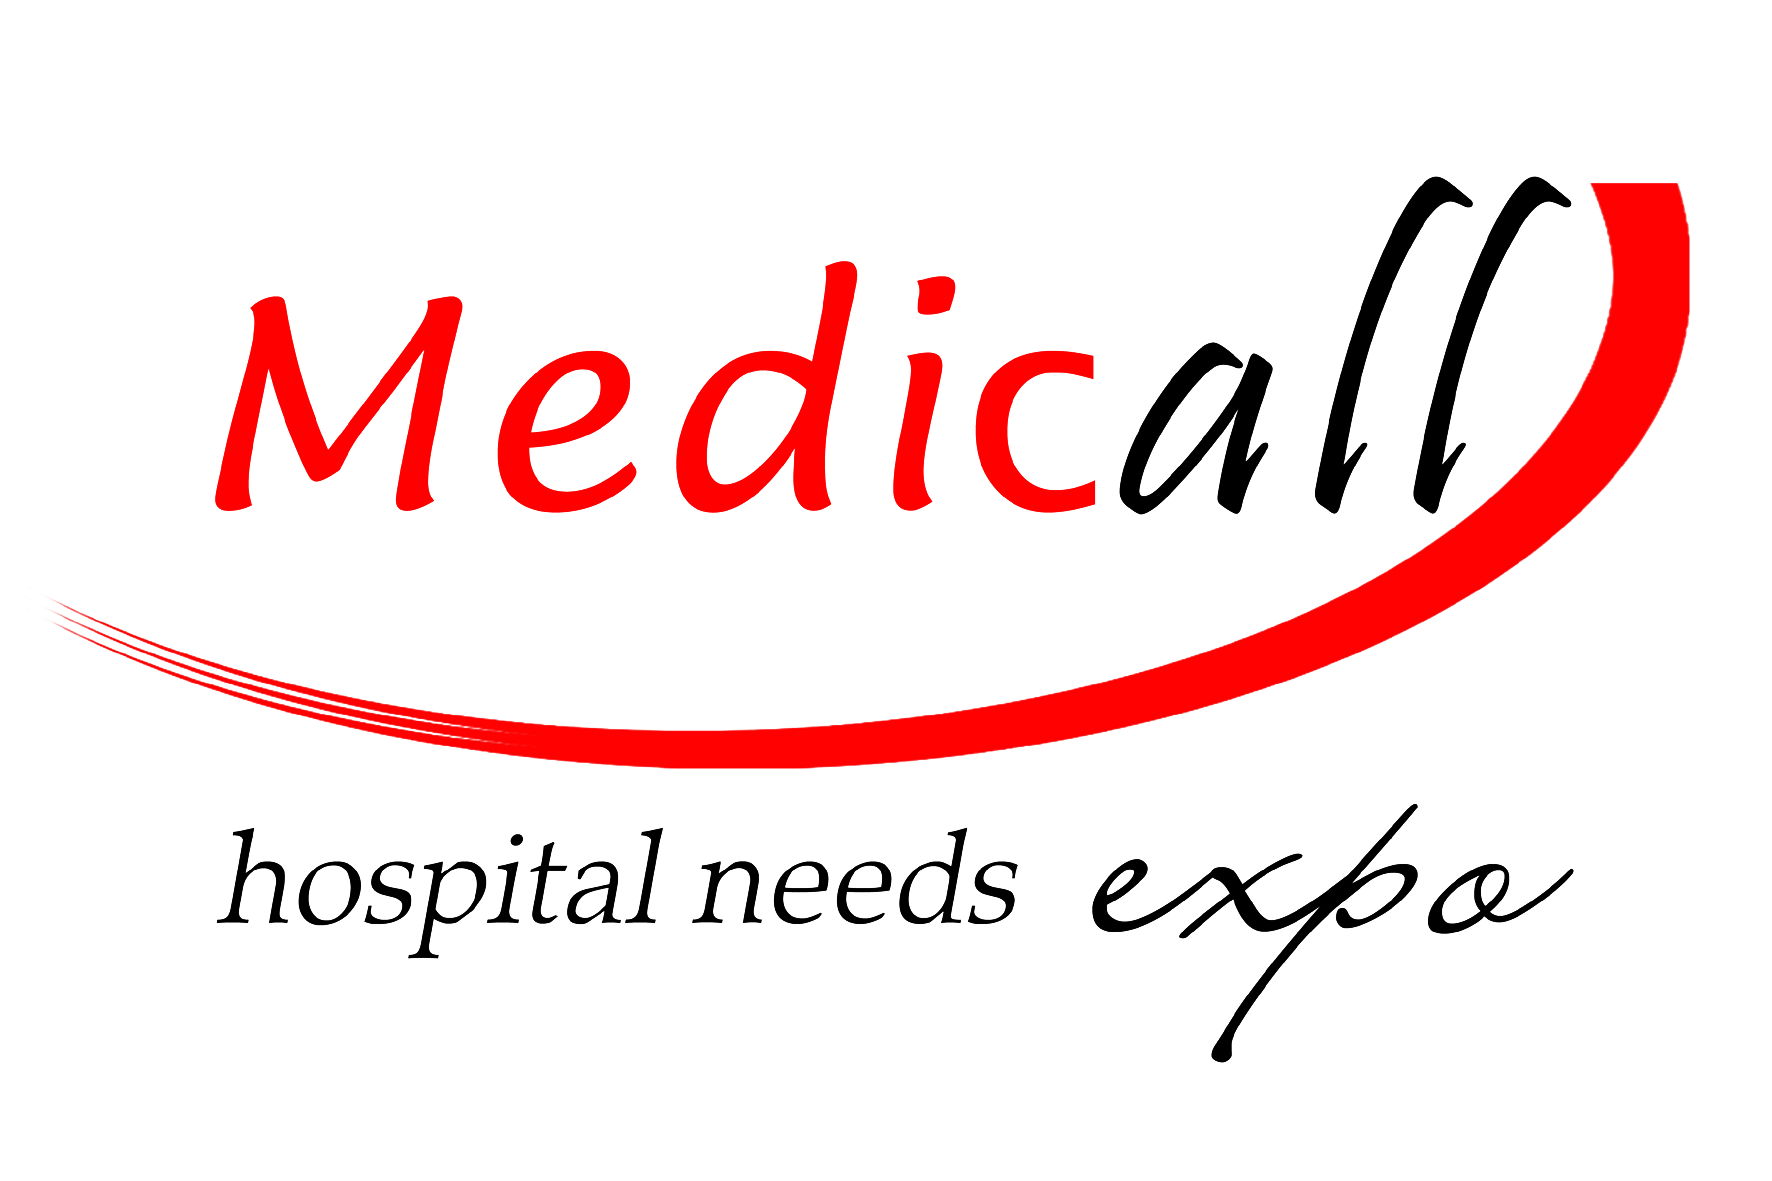 Medicall -India’s Largest & No.1 Medical Equipment Exhibition